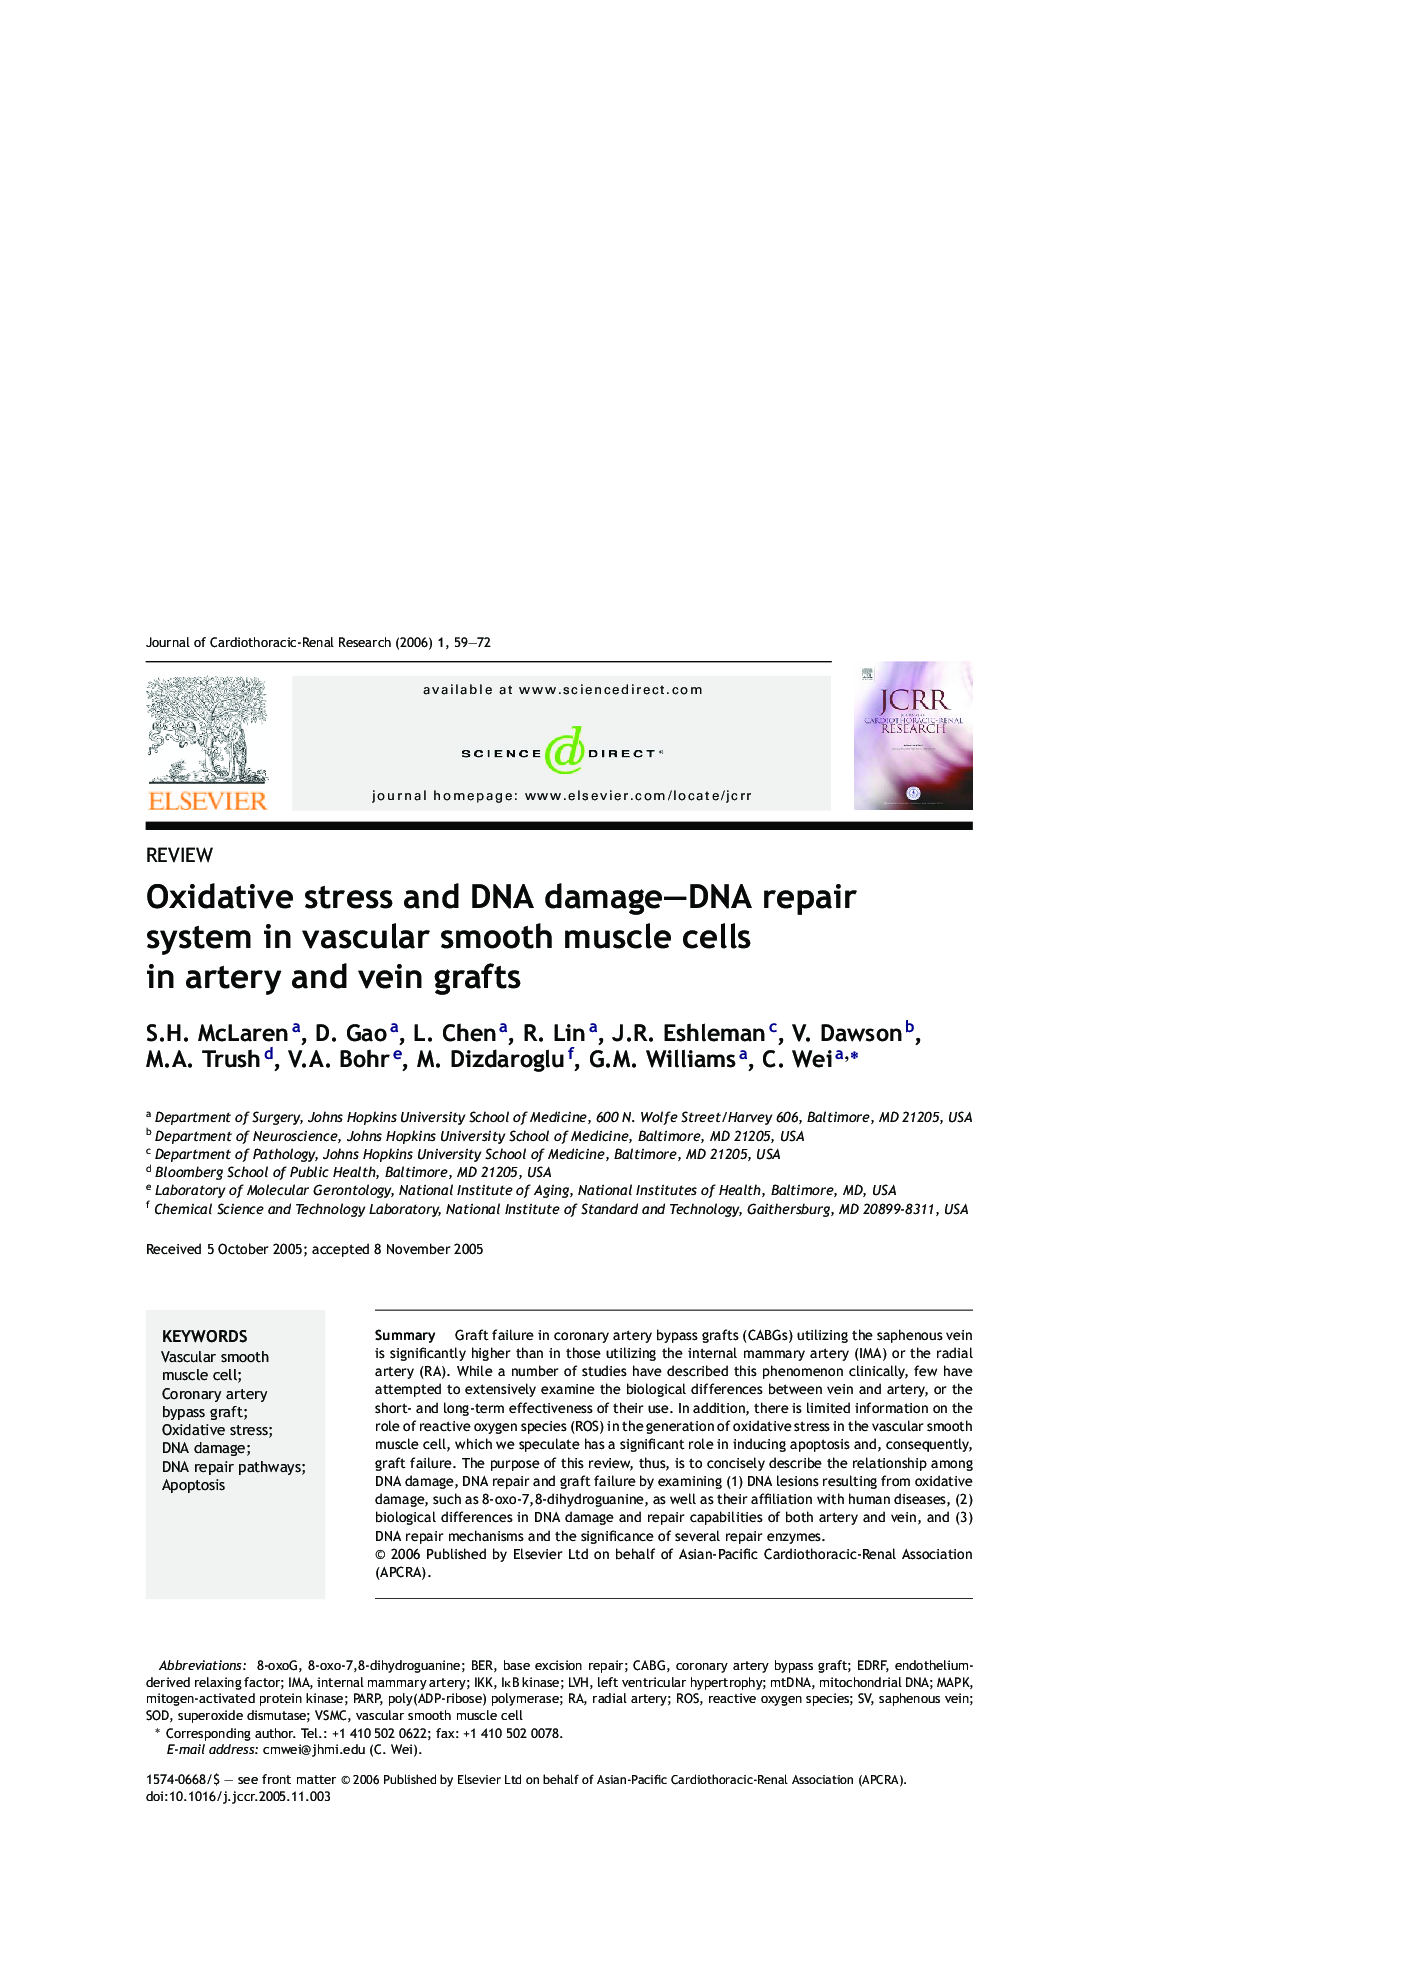 Oxidative stress and DNA damage–DNA repair system in vascular smooth muscle cells in artery and vein grafts